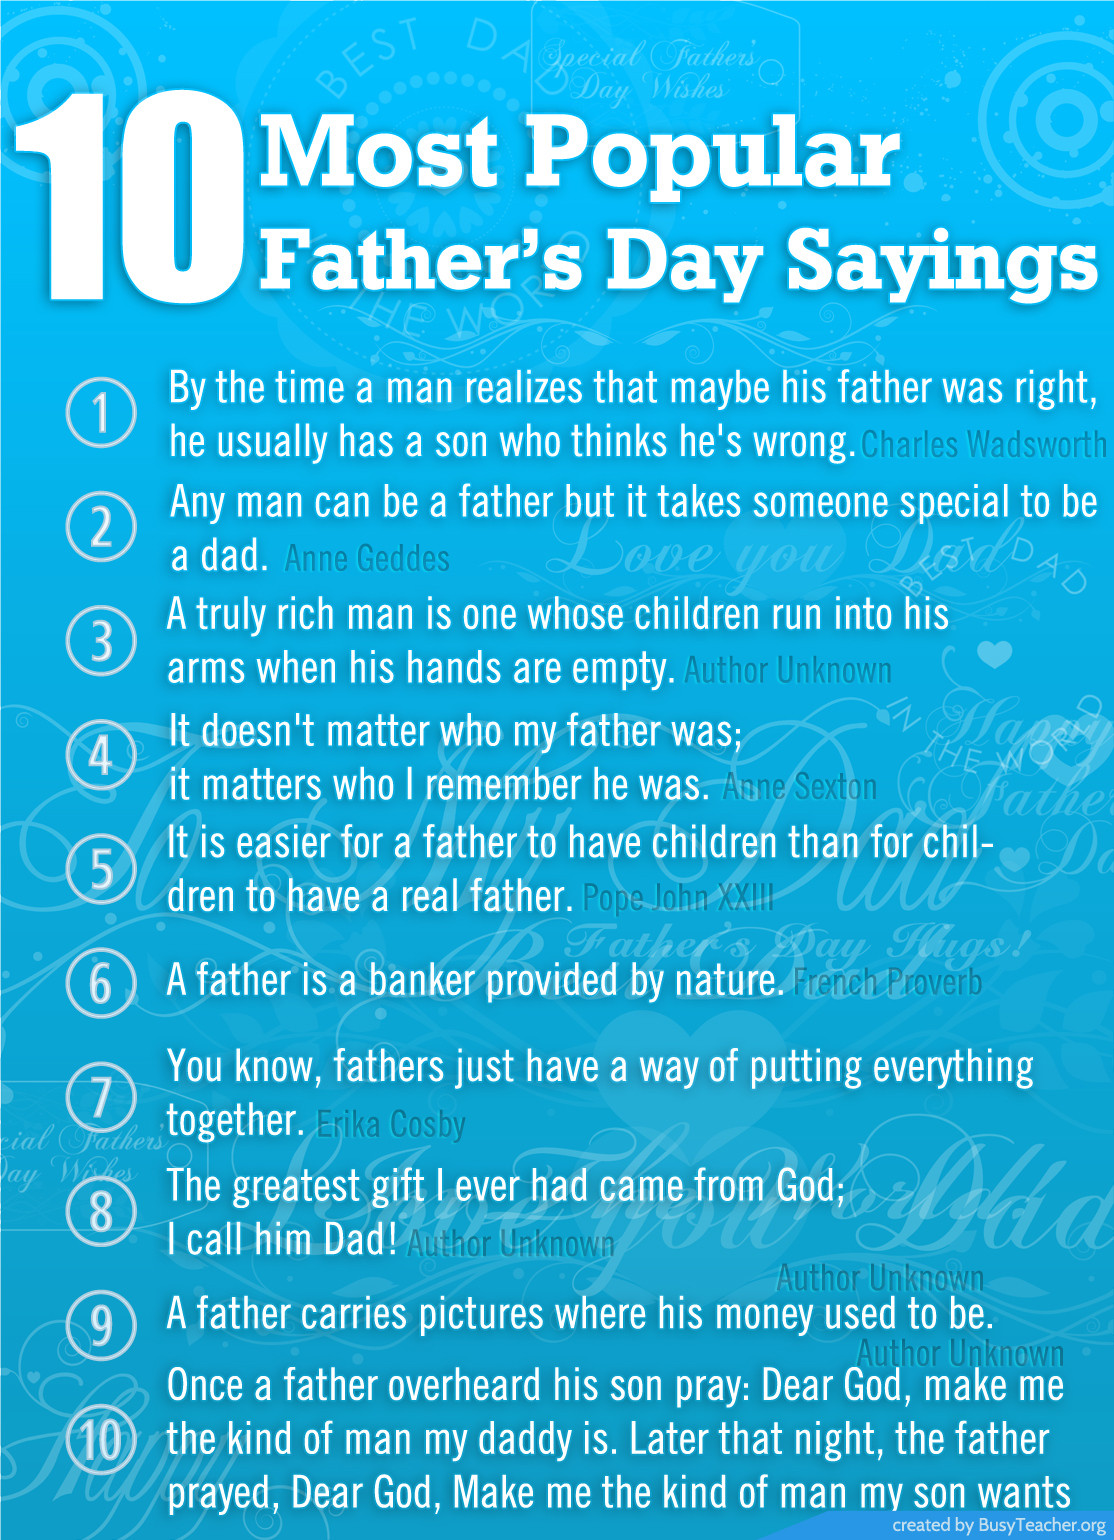 Fathers Day Quote Images
 Ten Popular Father’s Day Quotes